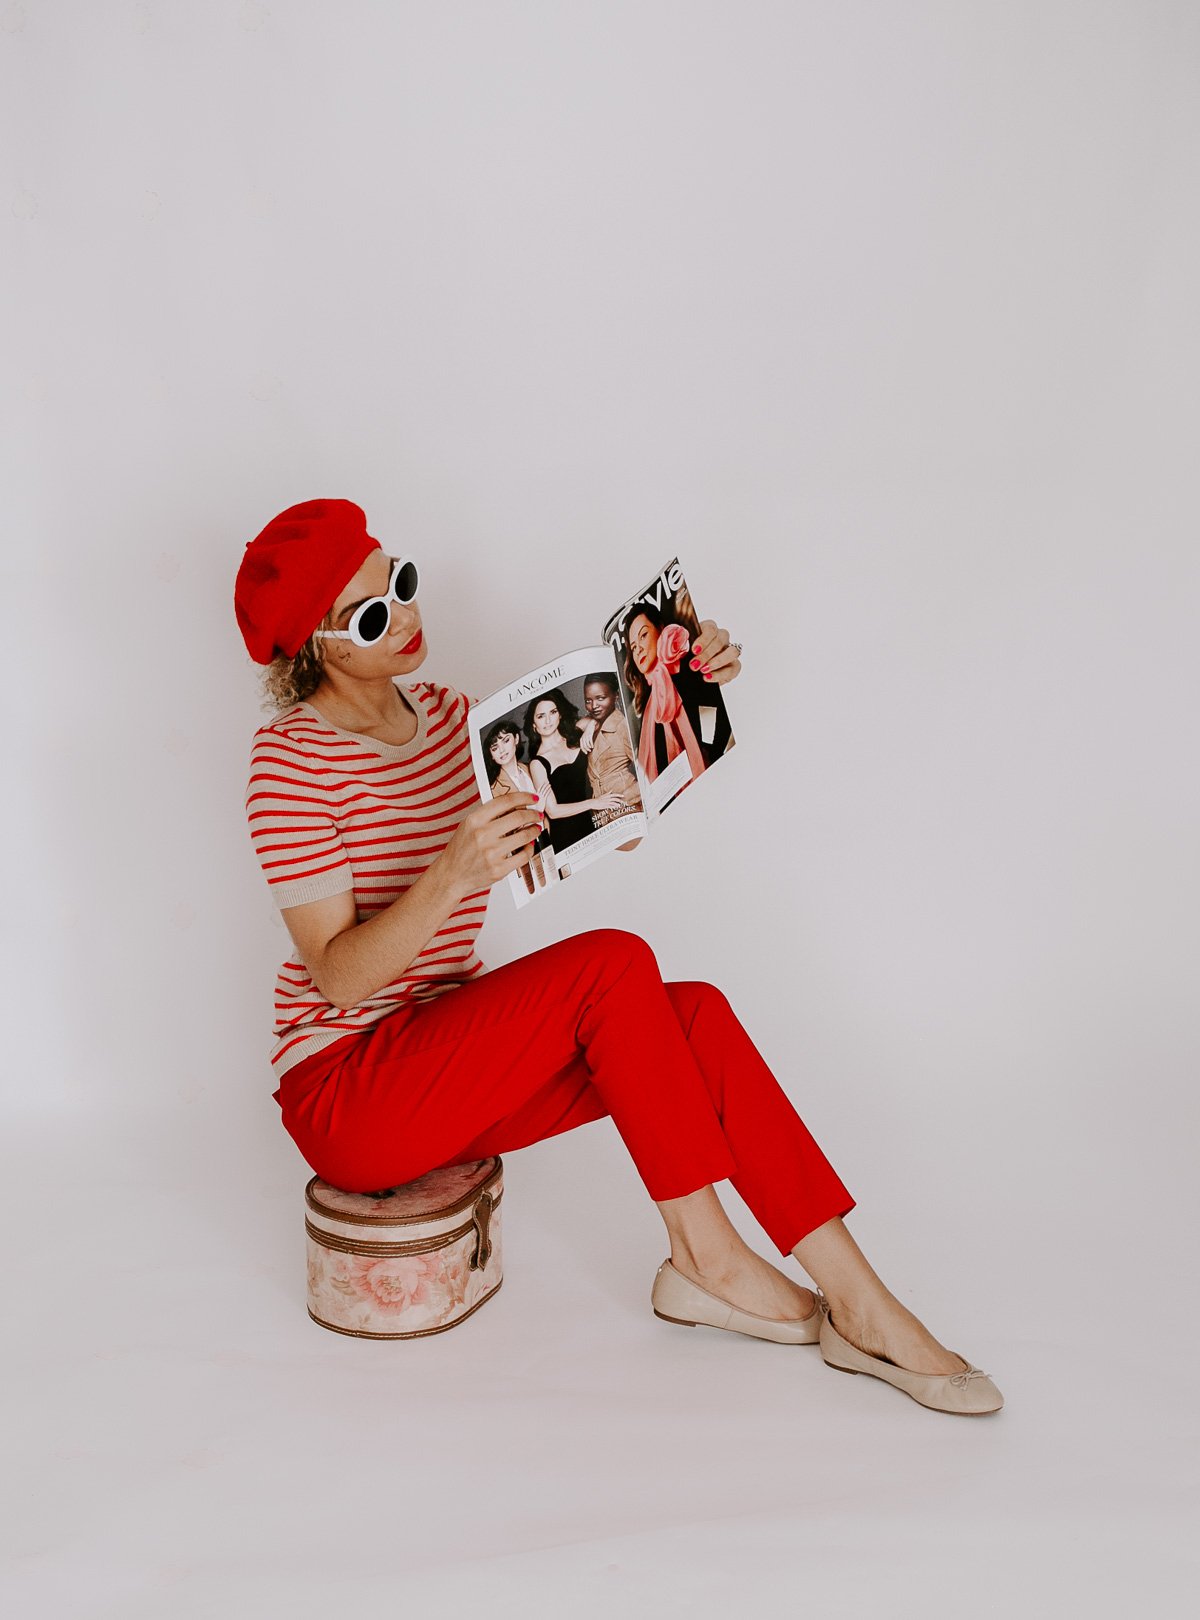 This red Parisian chic outfit with the striped top and beret is what all French style outfit dreams are made of!